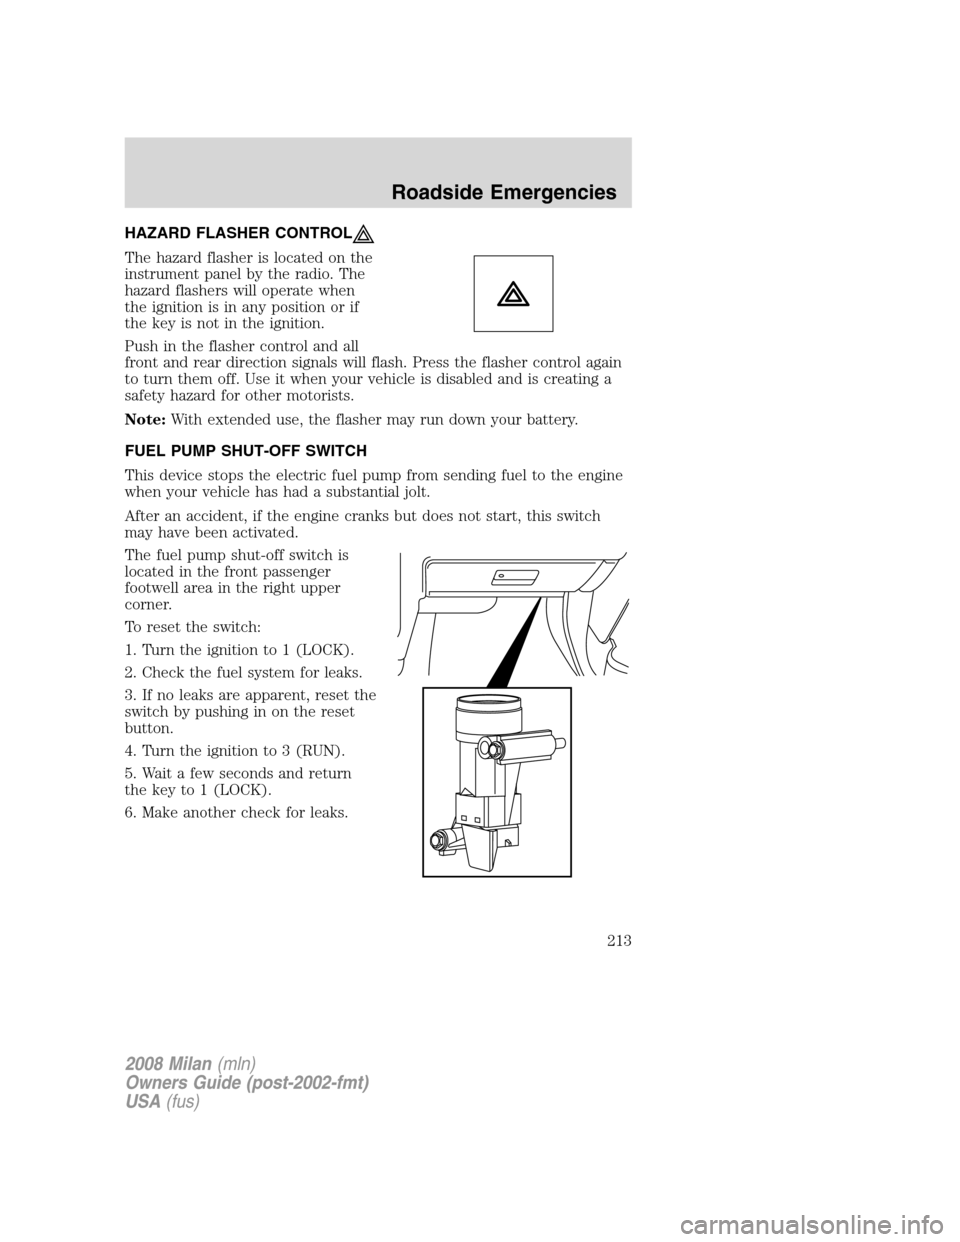 Mercury Milan 2008  Owners Manuals HAZARD FLASHER CONTROL
The hazard flasher is located on the
instrument panel by the radio. The
hazard flashers will operate when
the ignition is in any position or if
the key is not in the ignition.
P